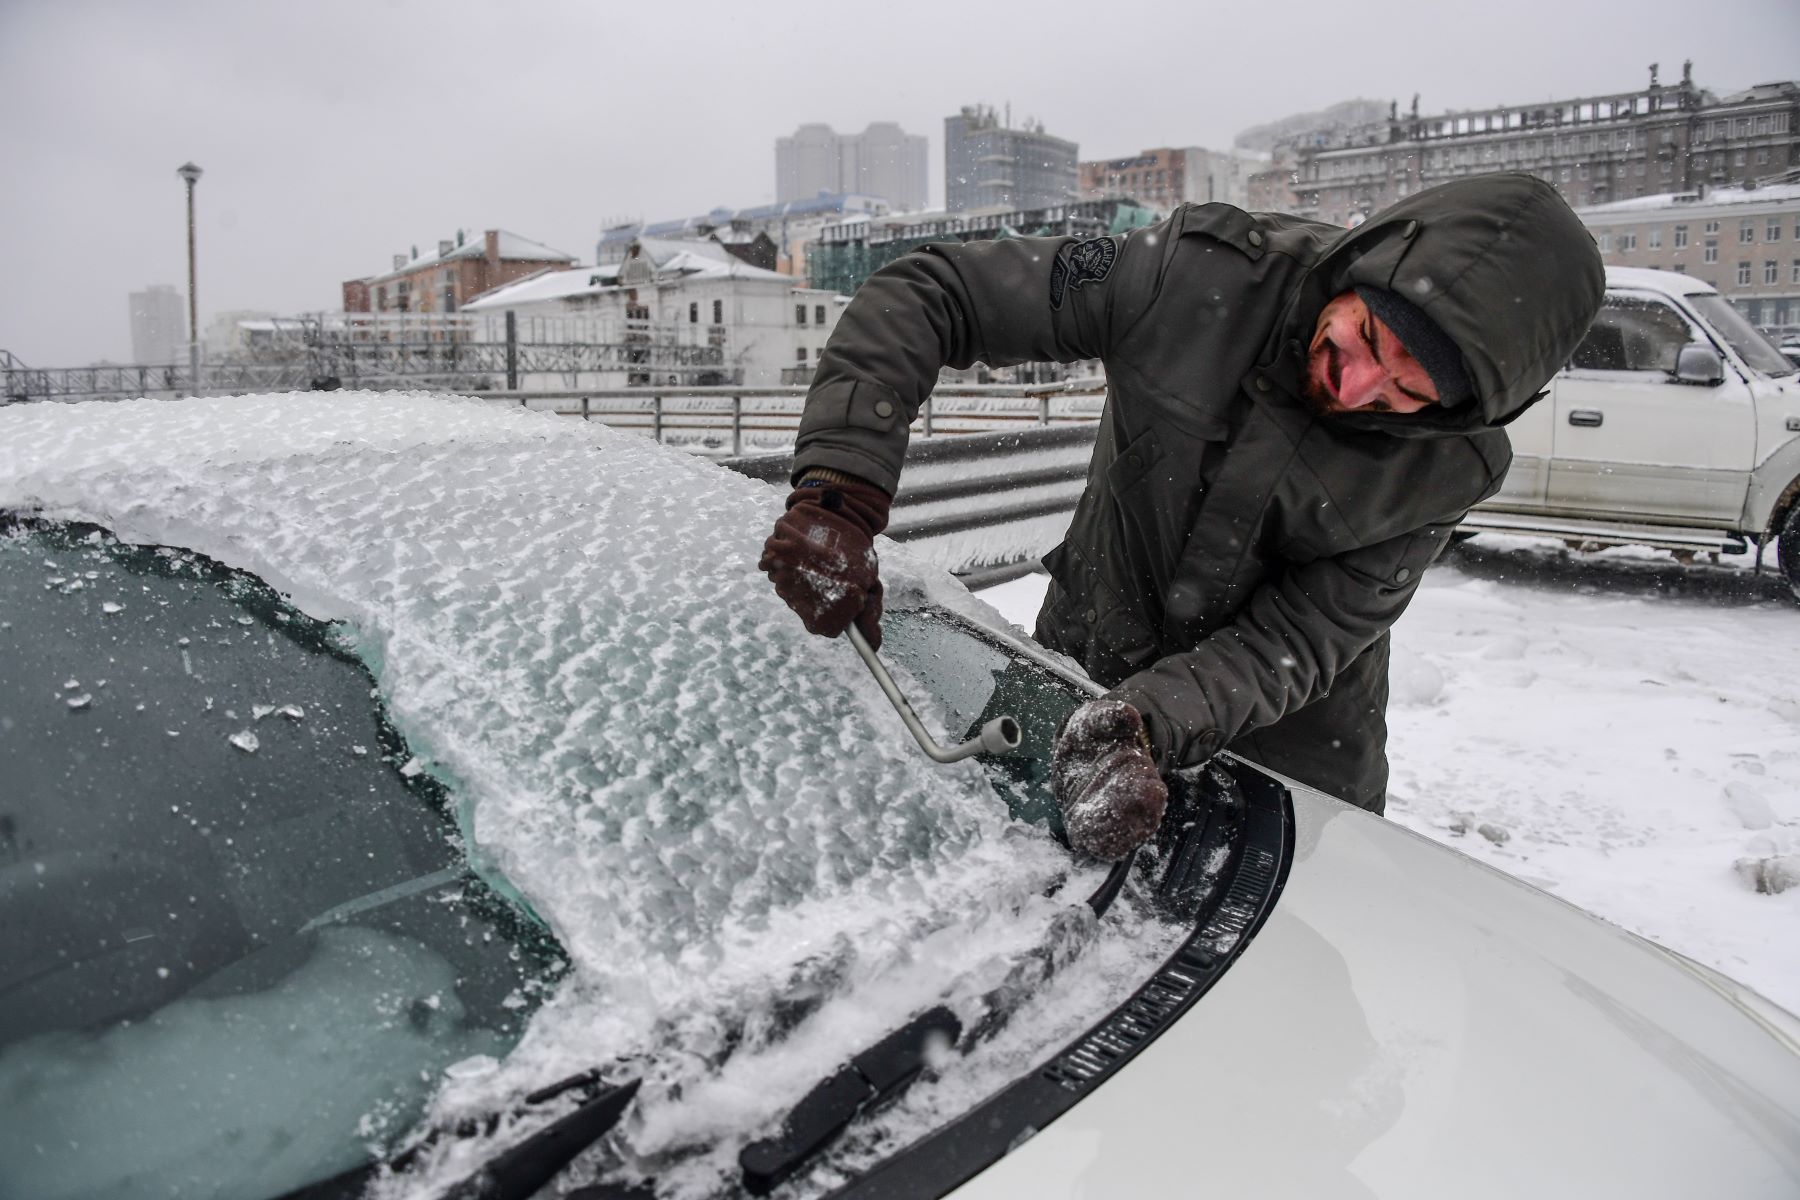 A man scraping ice off his windshield in Vladivostok, Russia